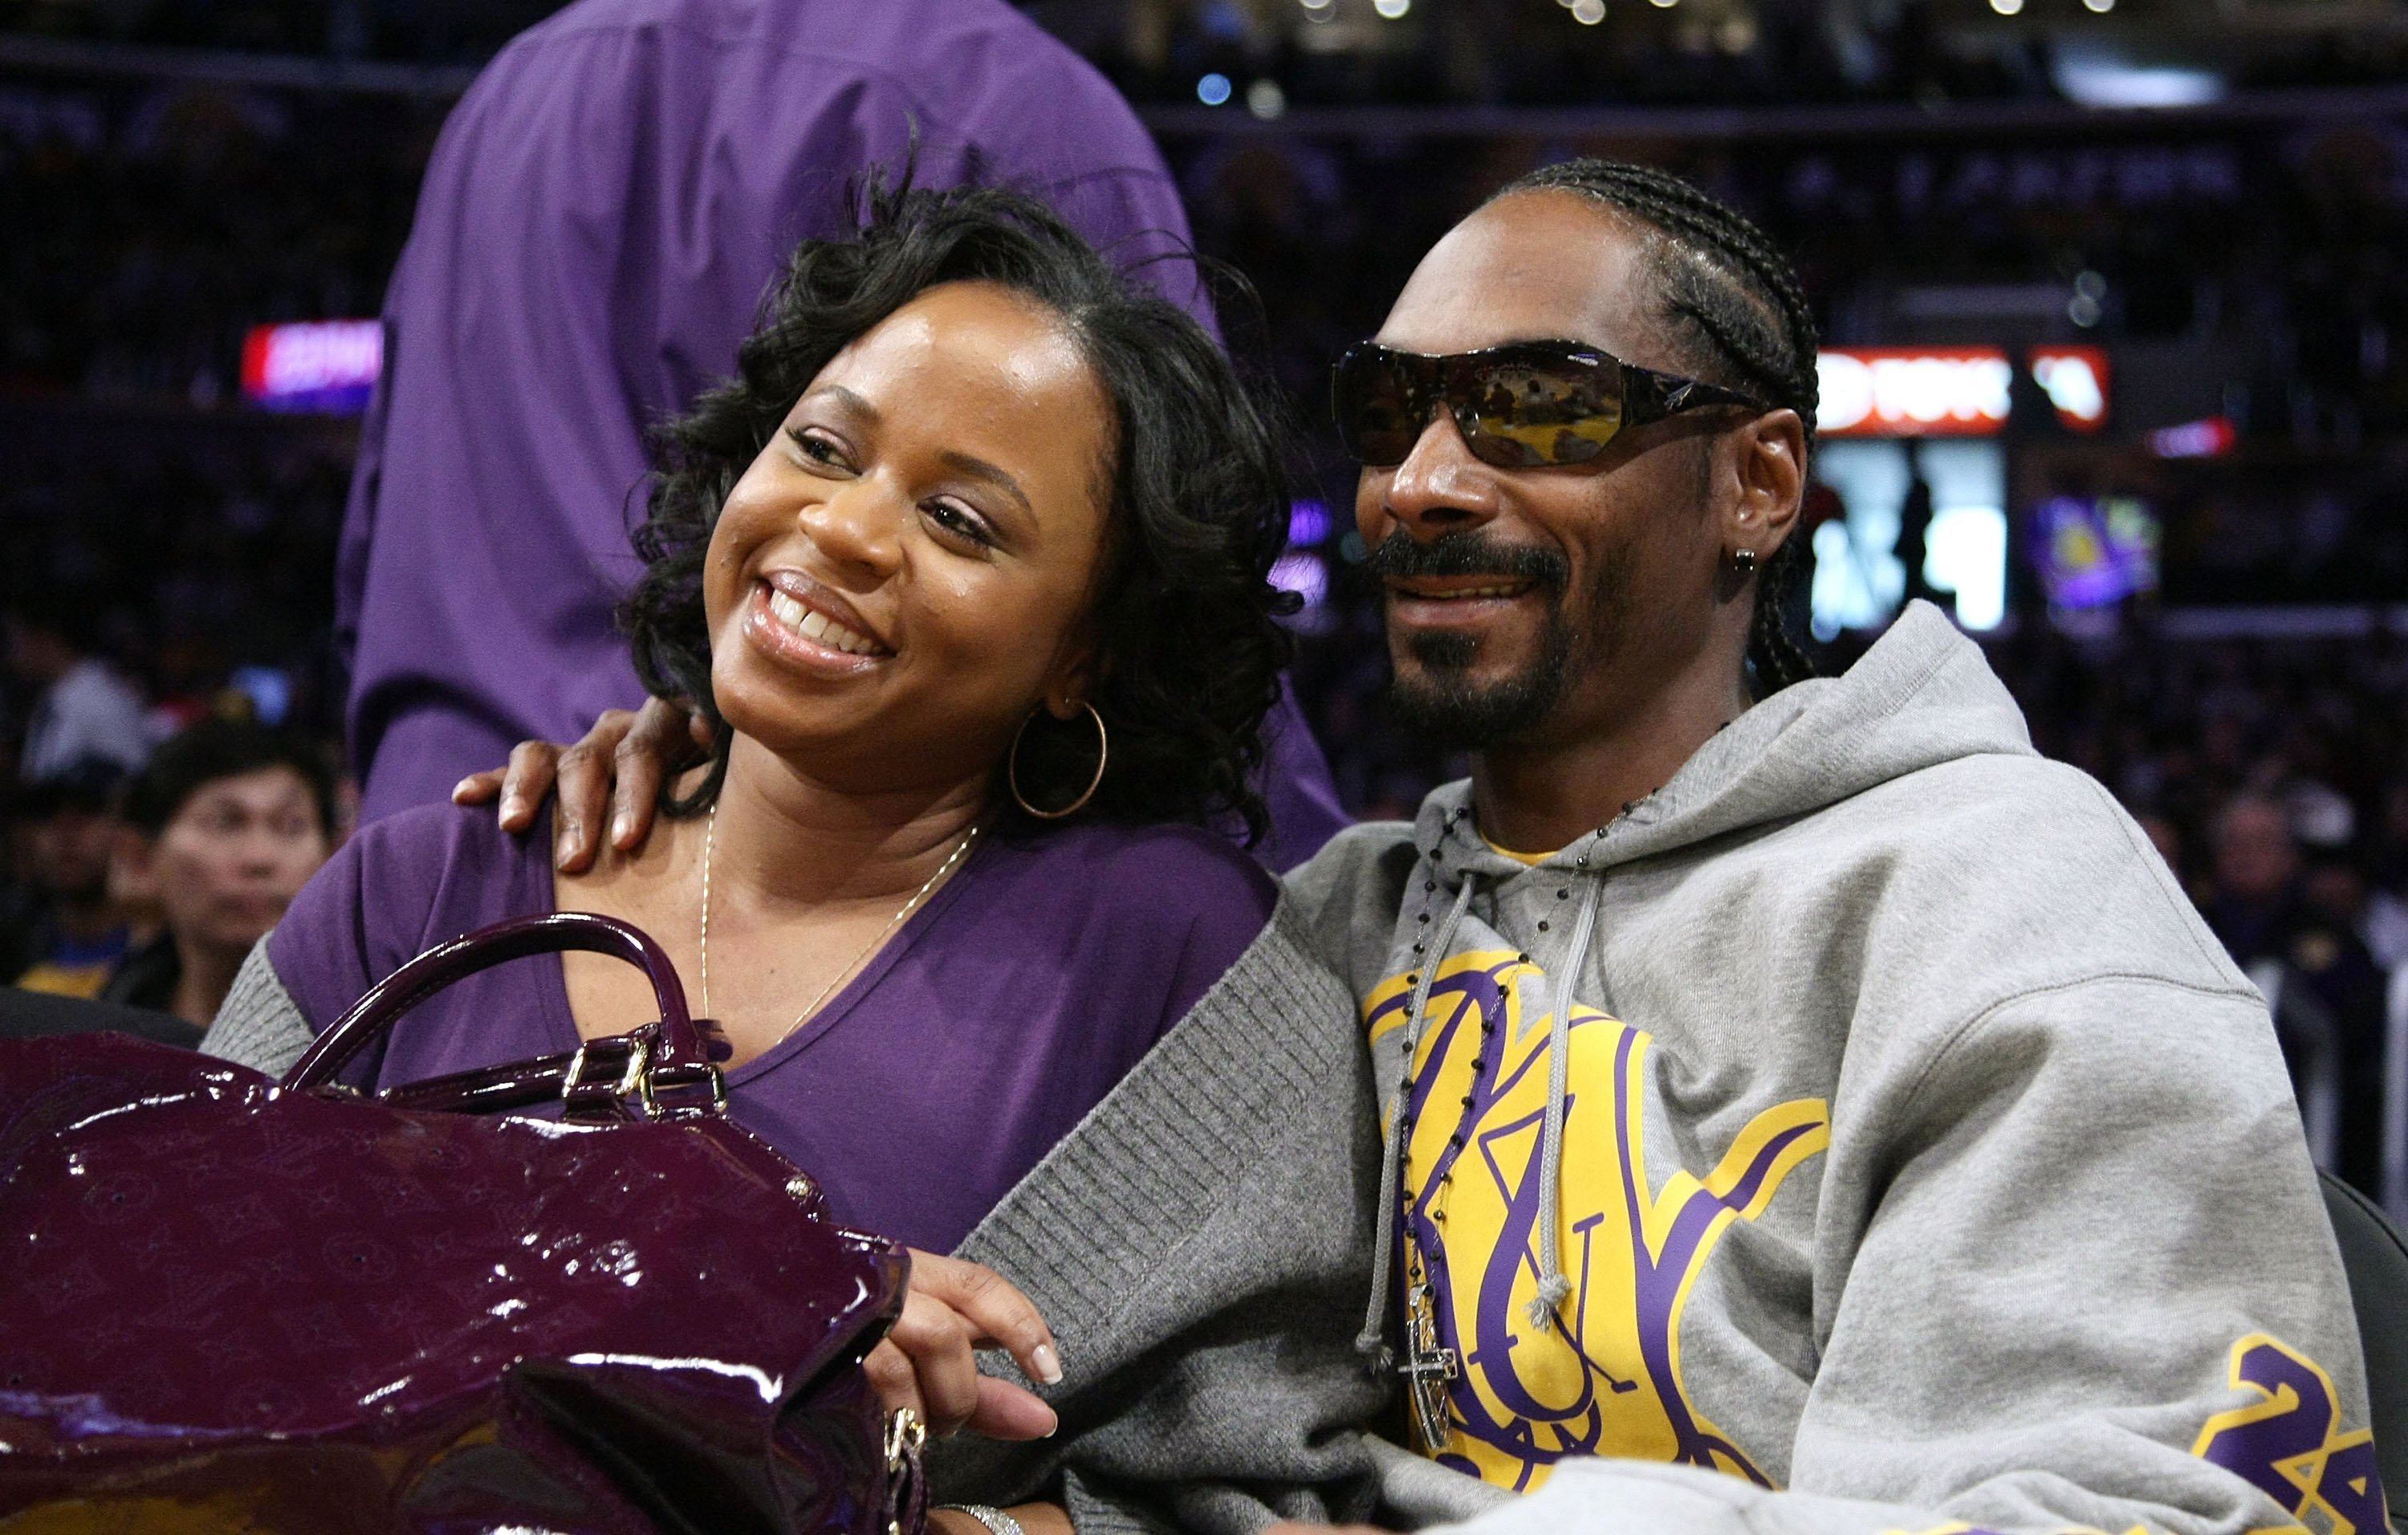 Snoop Dogg & Shante Broadus at a basketball game in California on Dec. 25, 2008 | Photo: Getty Images